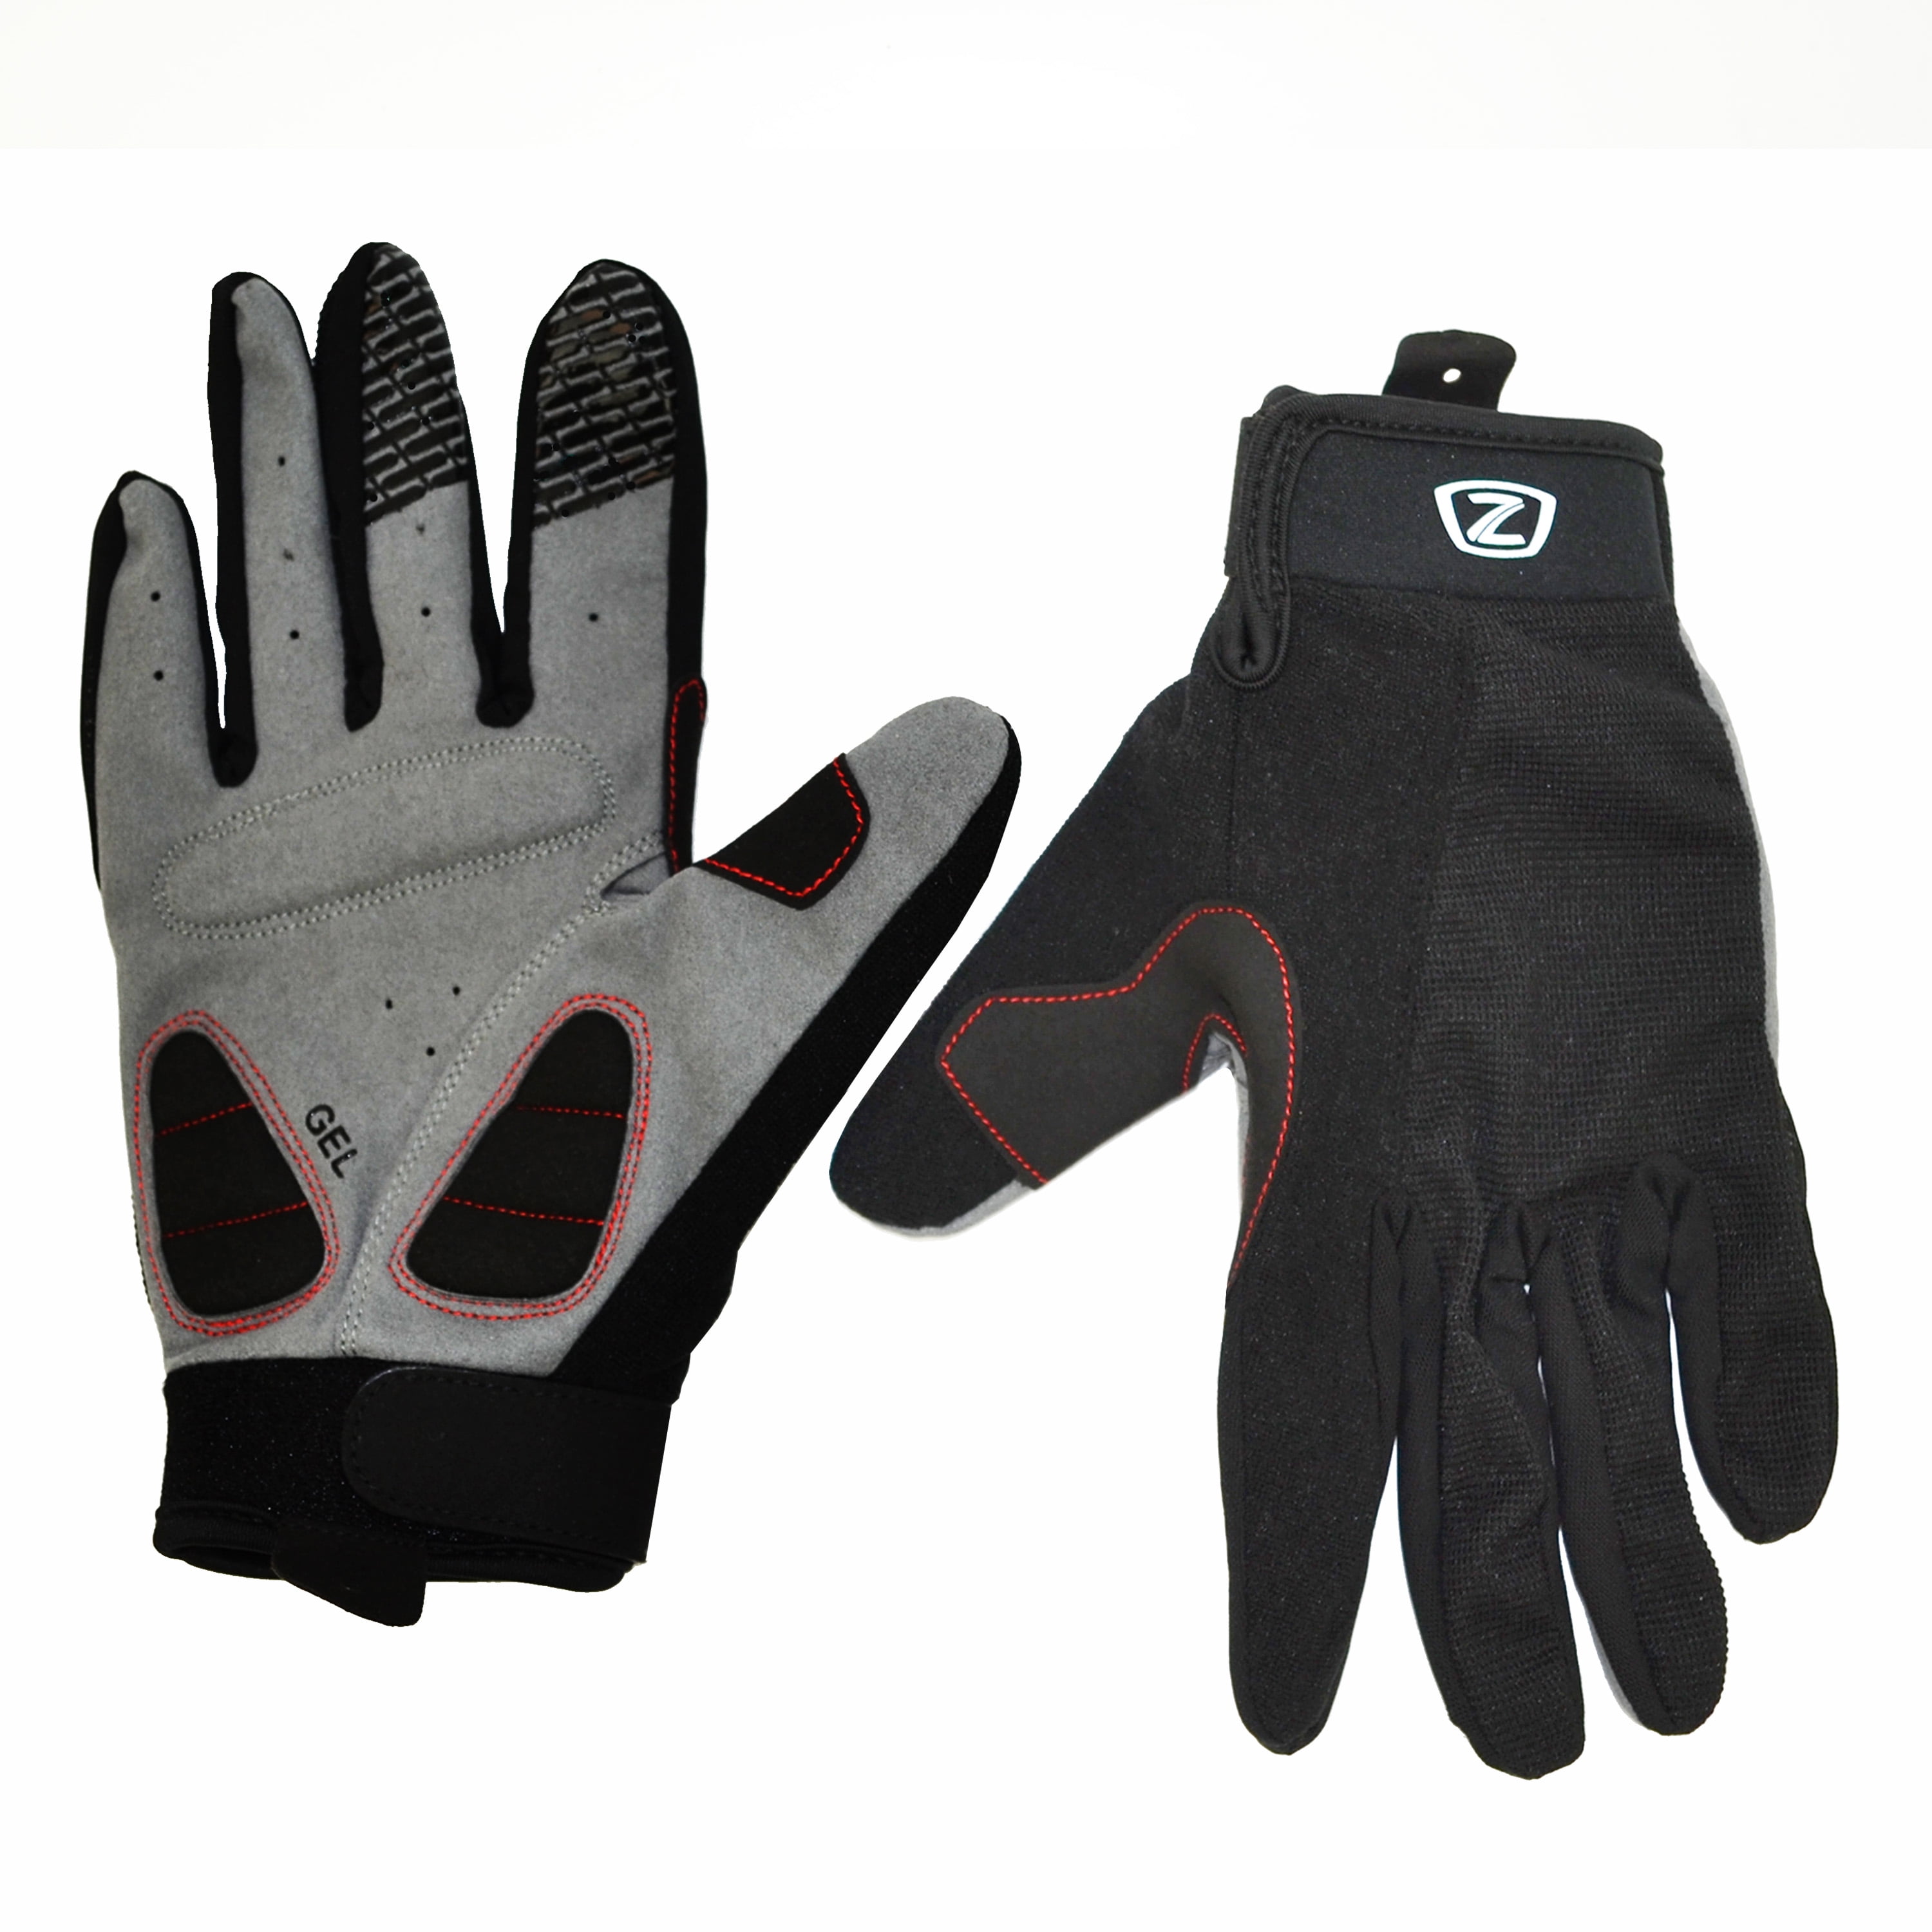 cycling gloves fingerless size 7 black with gel 